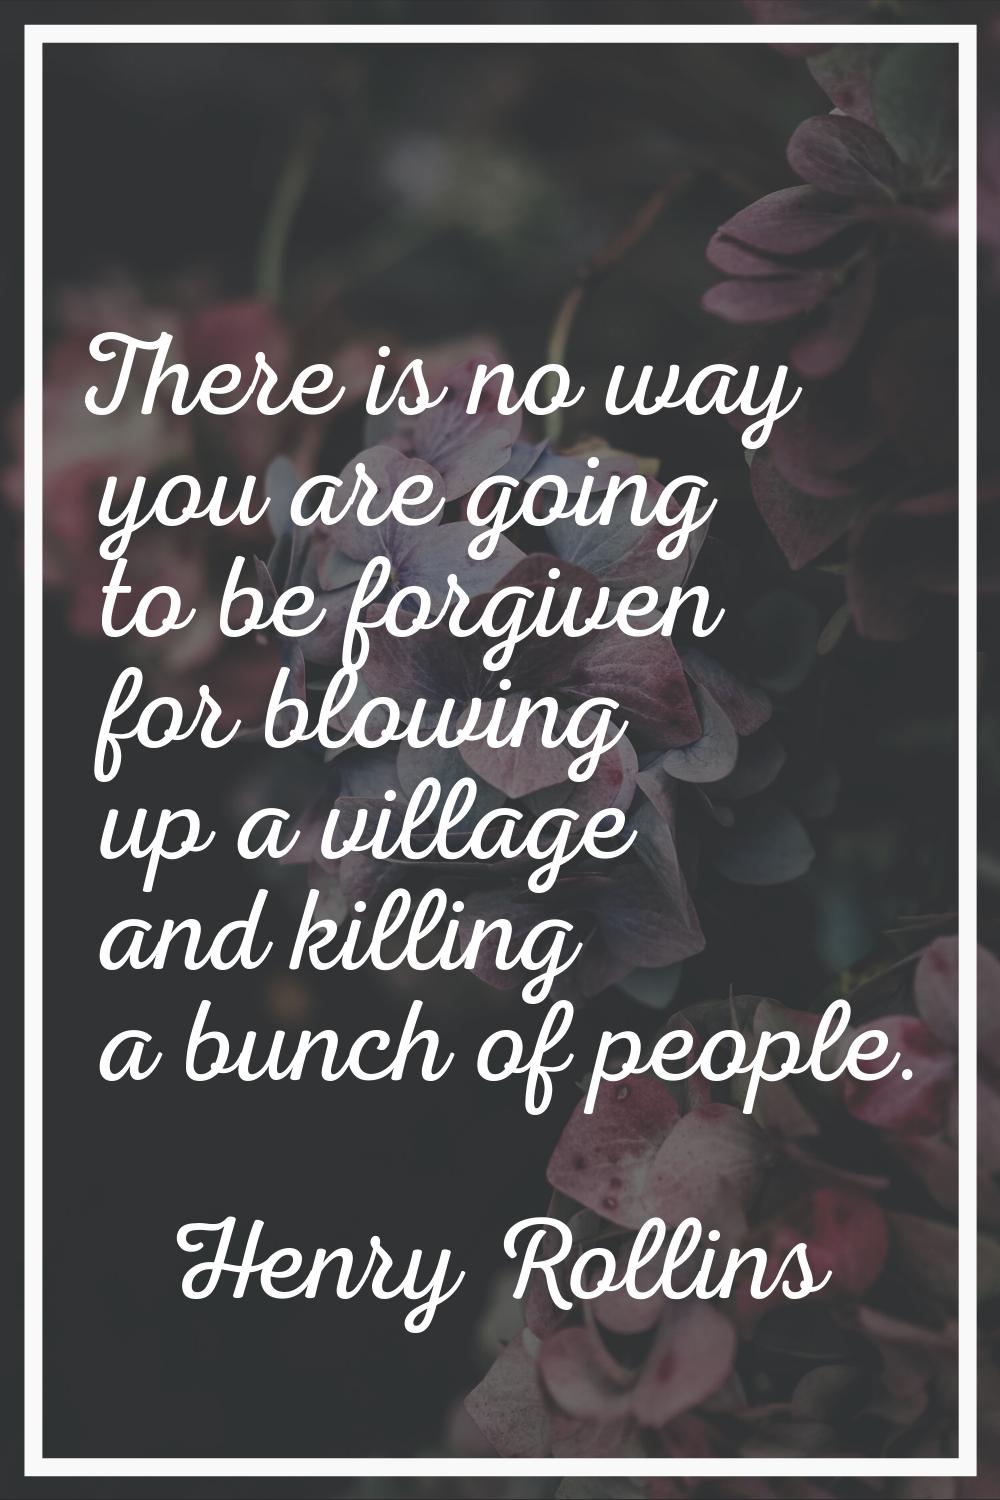 There is no way you are going to be forgiven for blowing up a village and killing a bunch of people